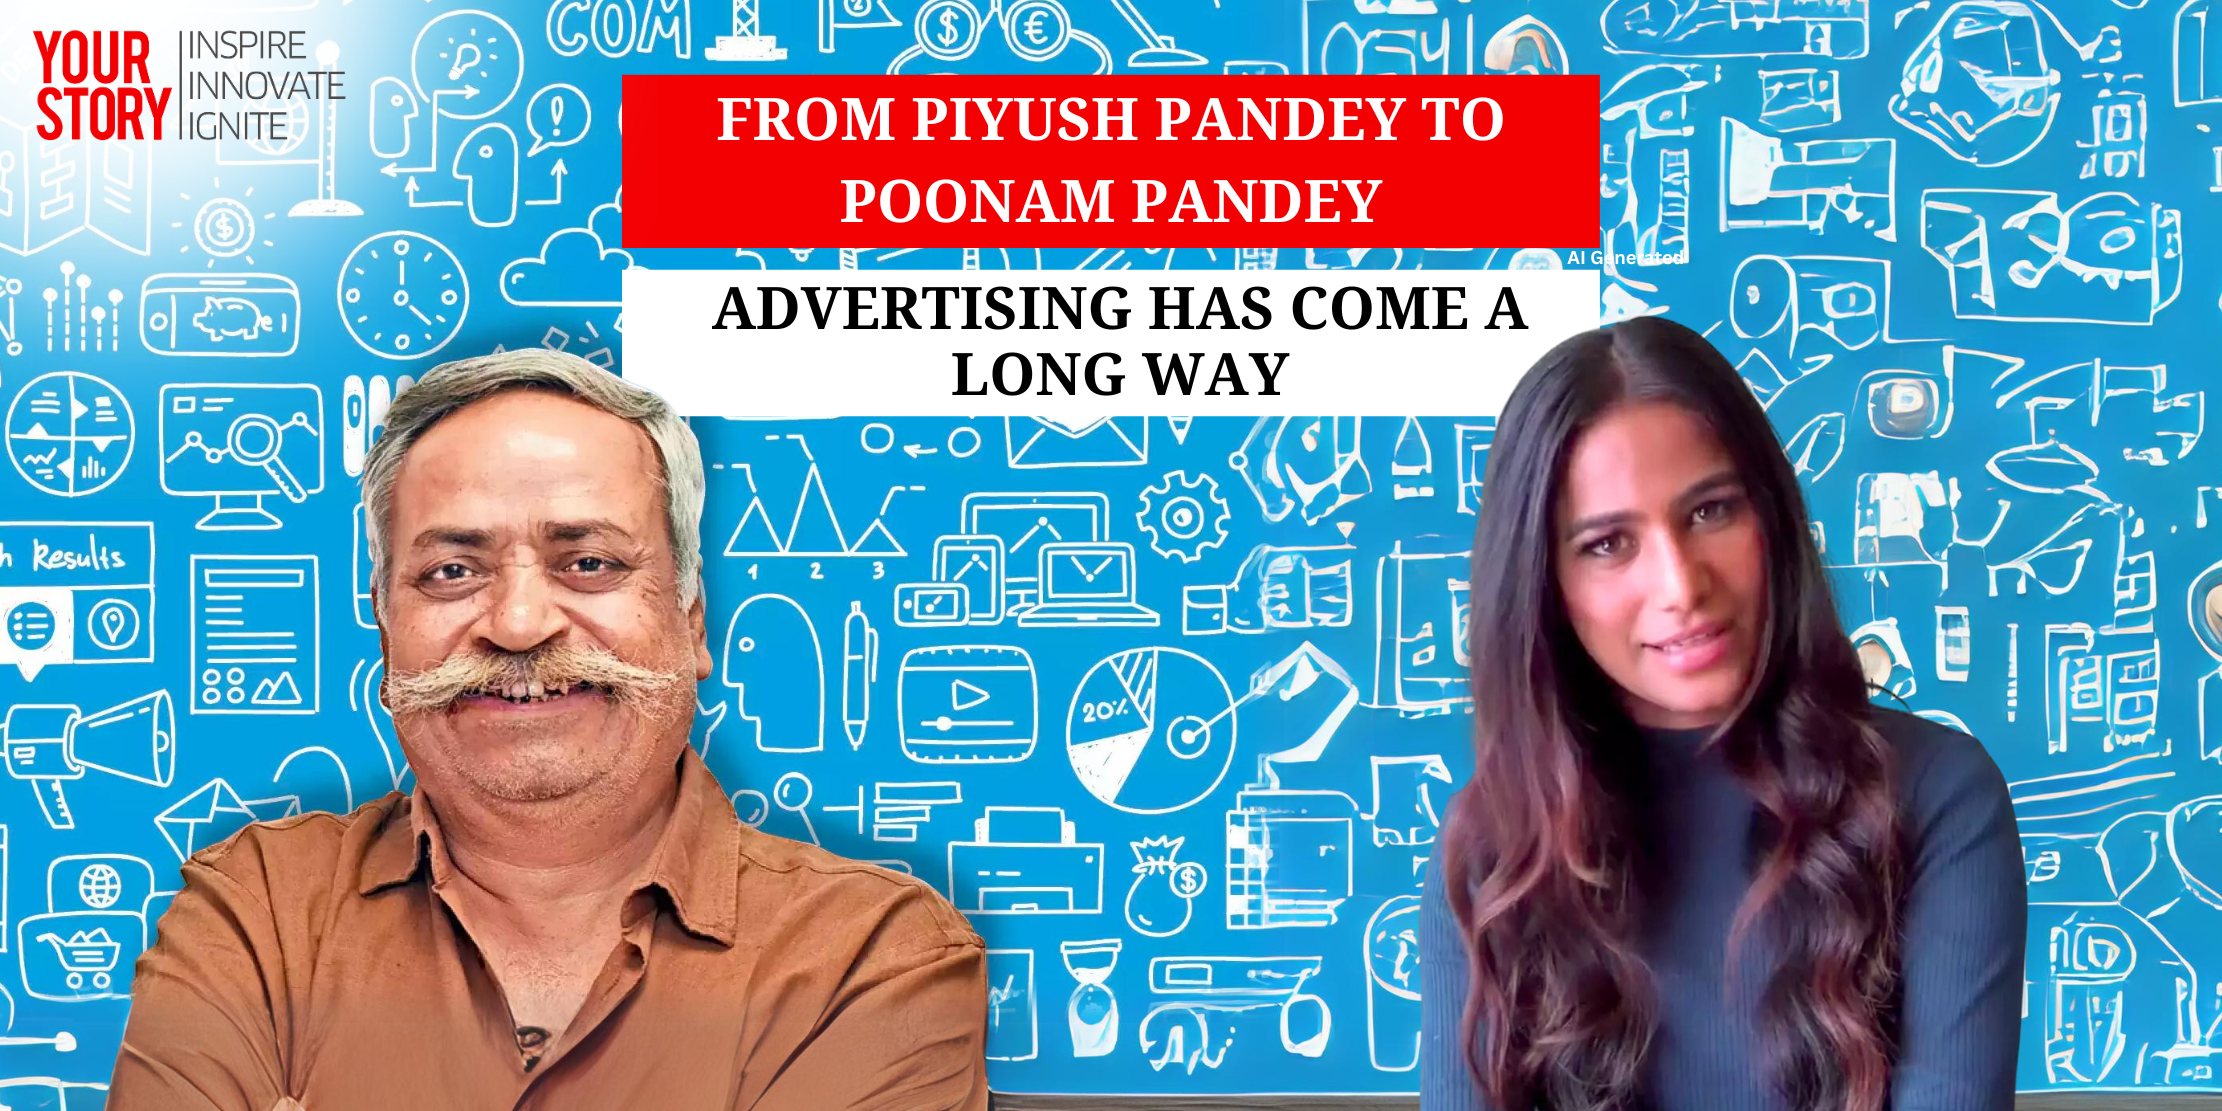 From Piyush Pandey to Poonam Pandey - Advertising has come a Long Way